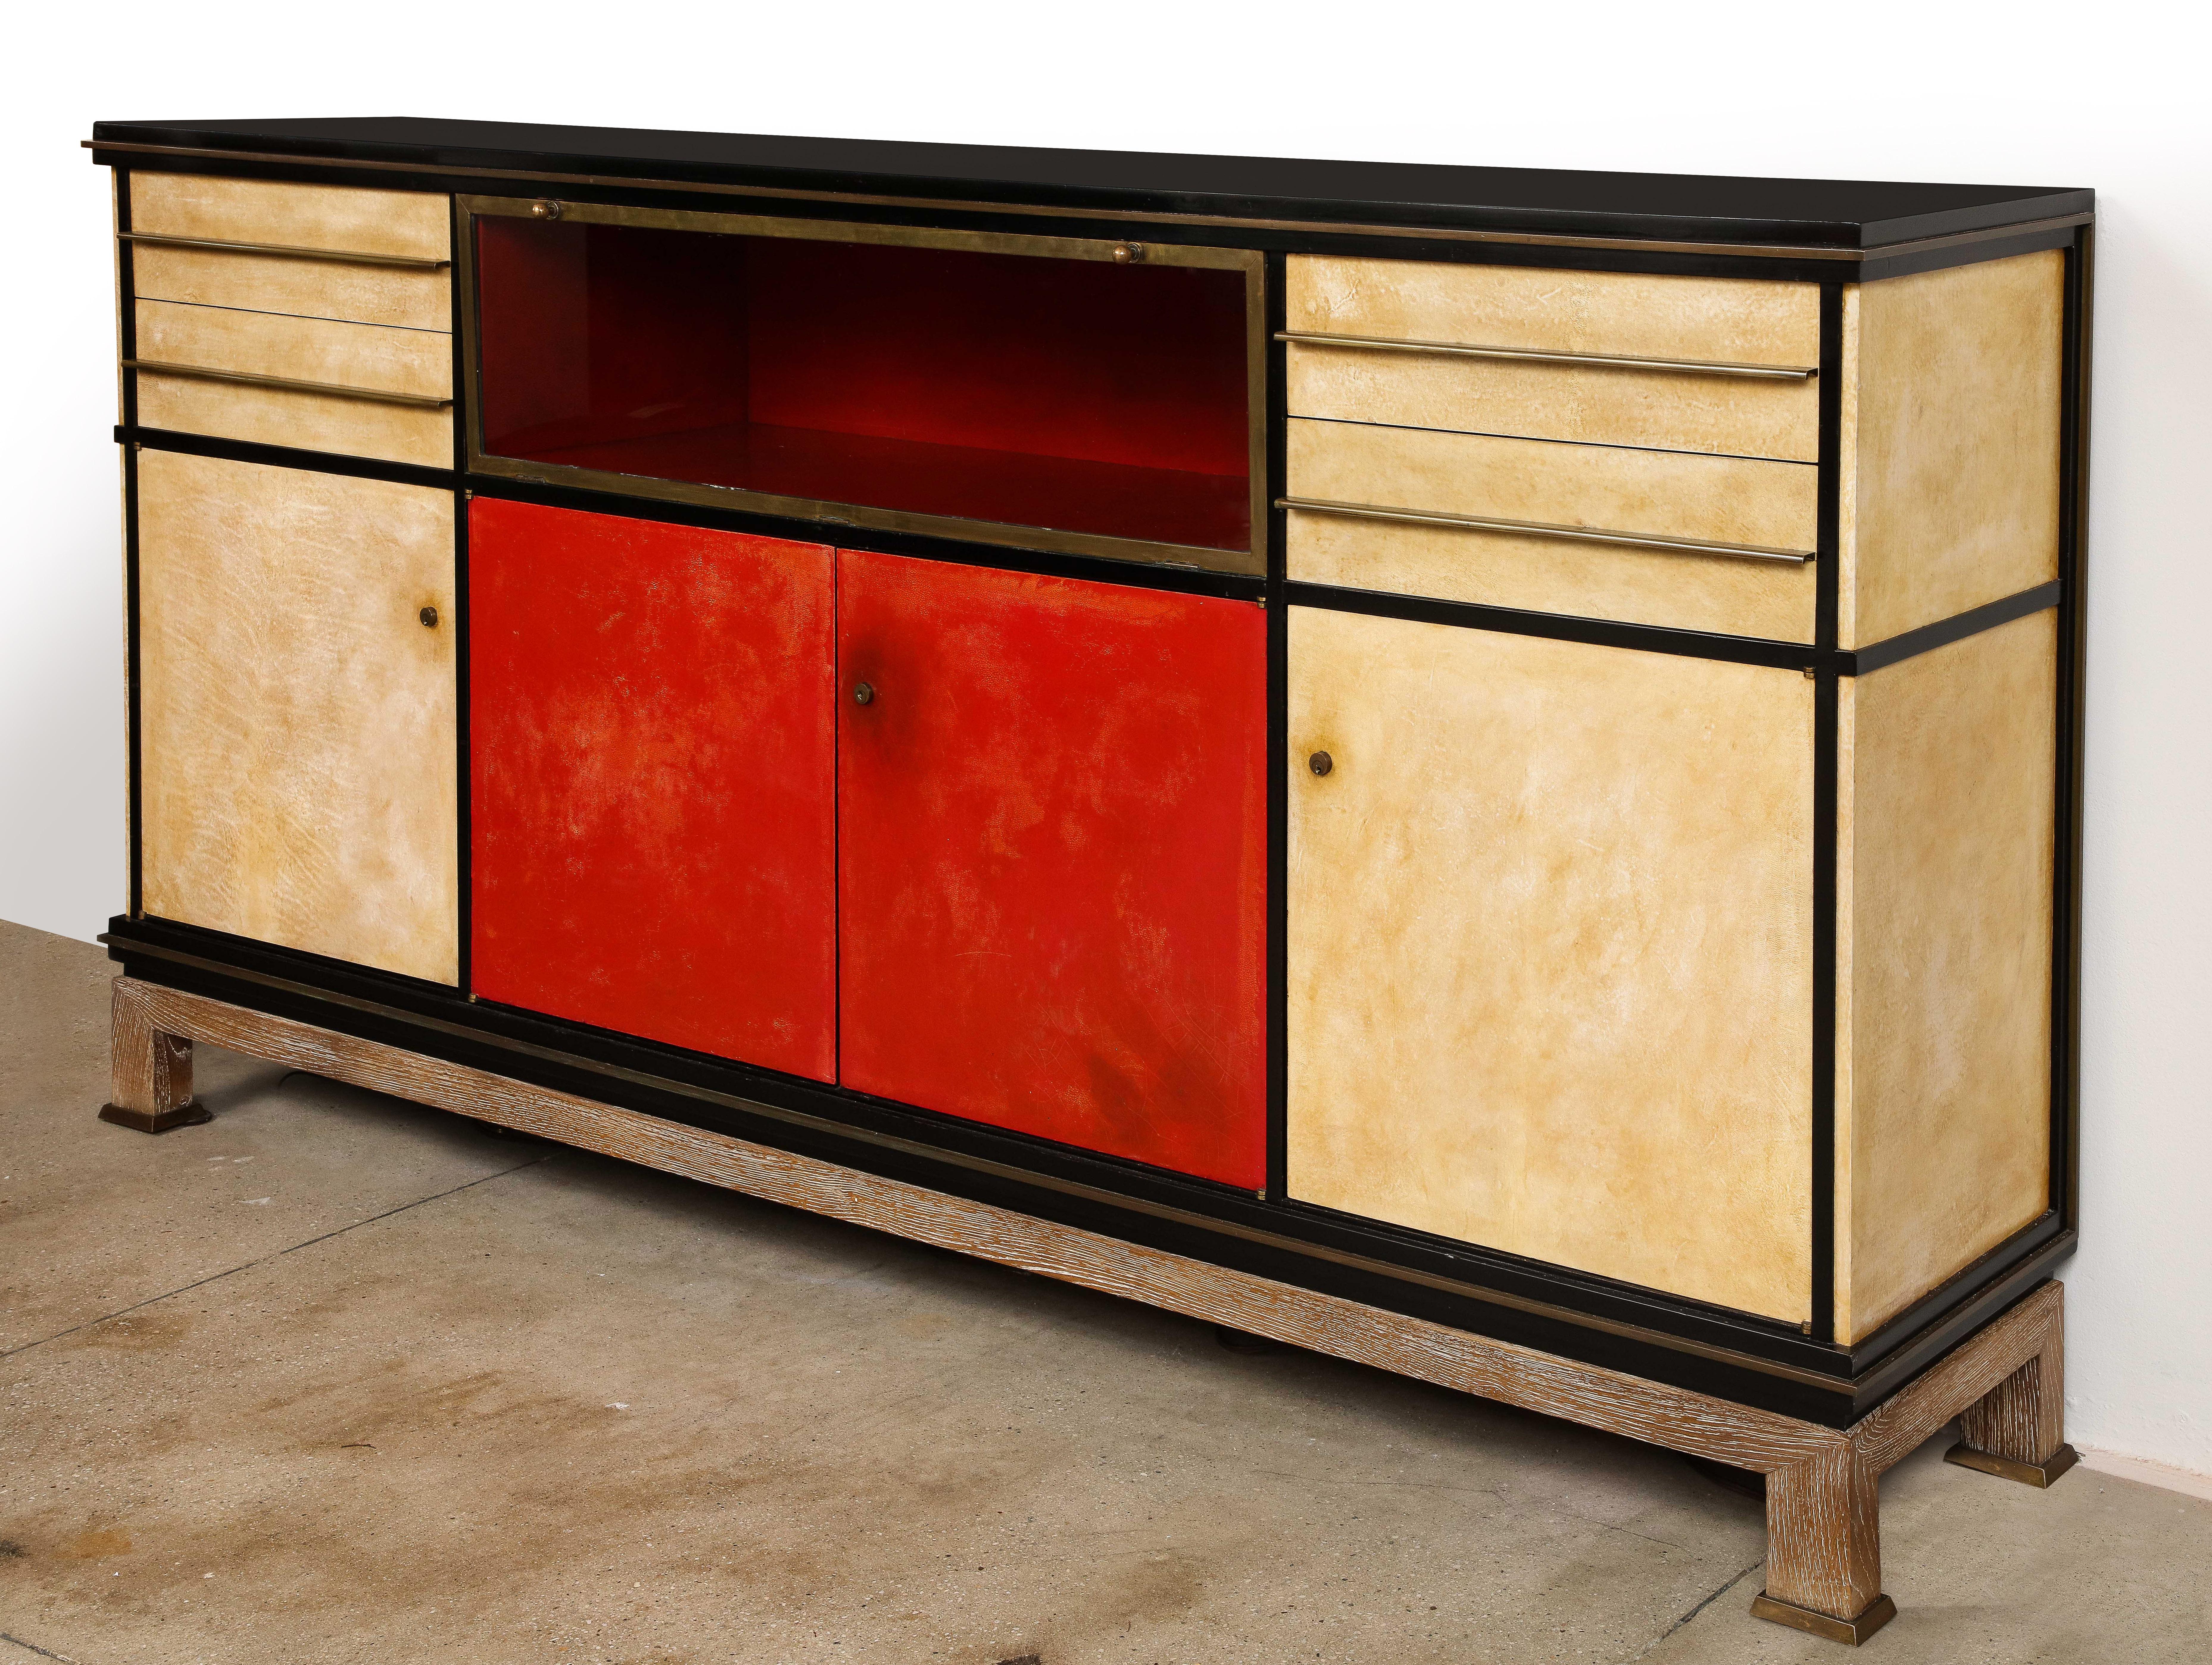 Important black lacquered wood, goatskin and red leather covered credenza by Paul Dupré Lafon, the front and sides decorated with bronze mouldings and drawer pulls. Glass and bronze drop front center vitrine with fitted with a beautiful red